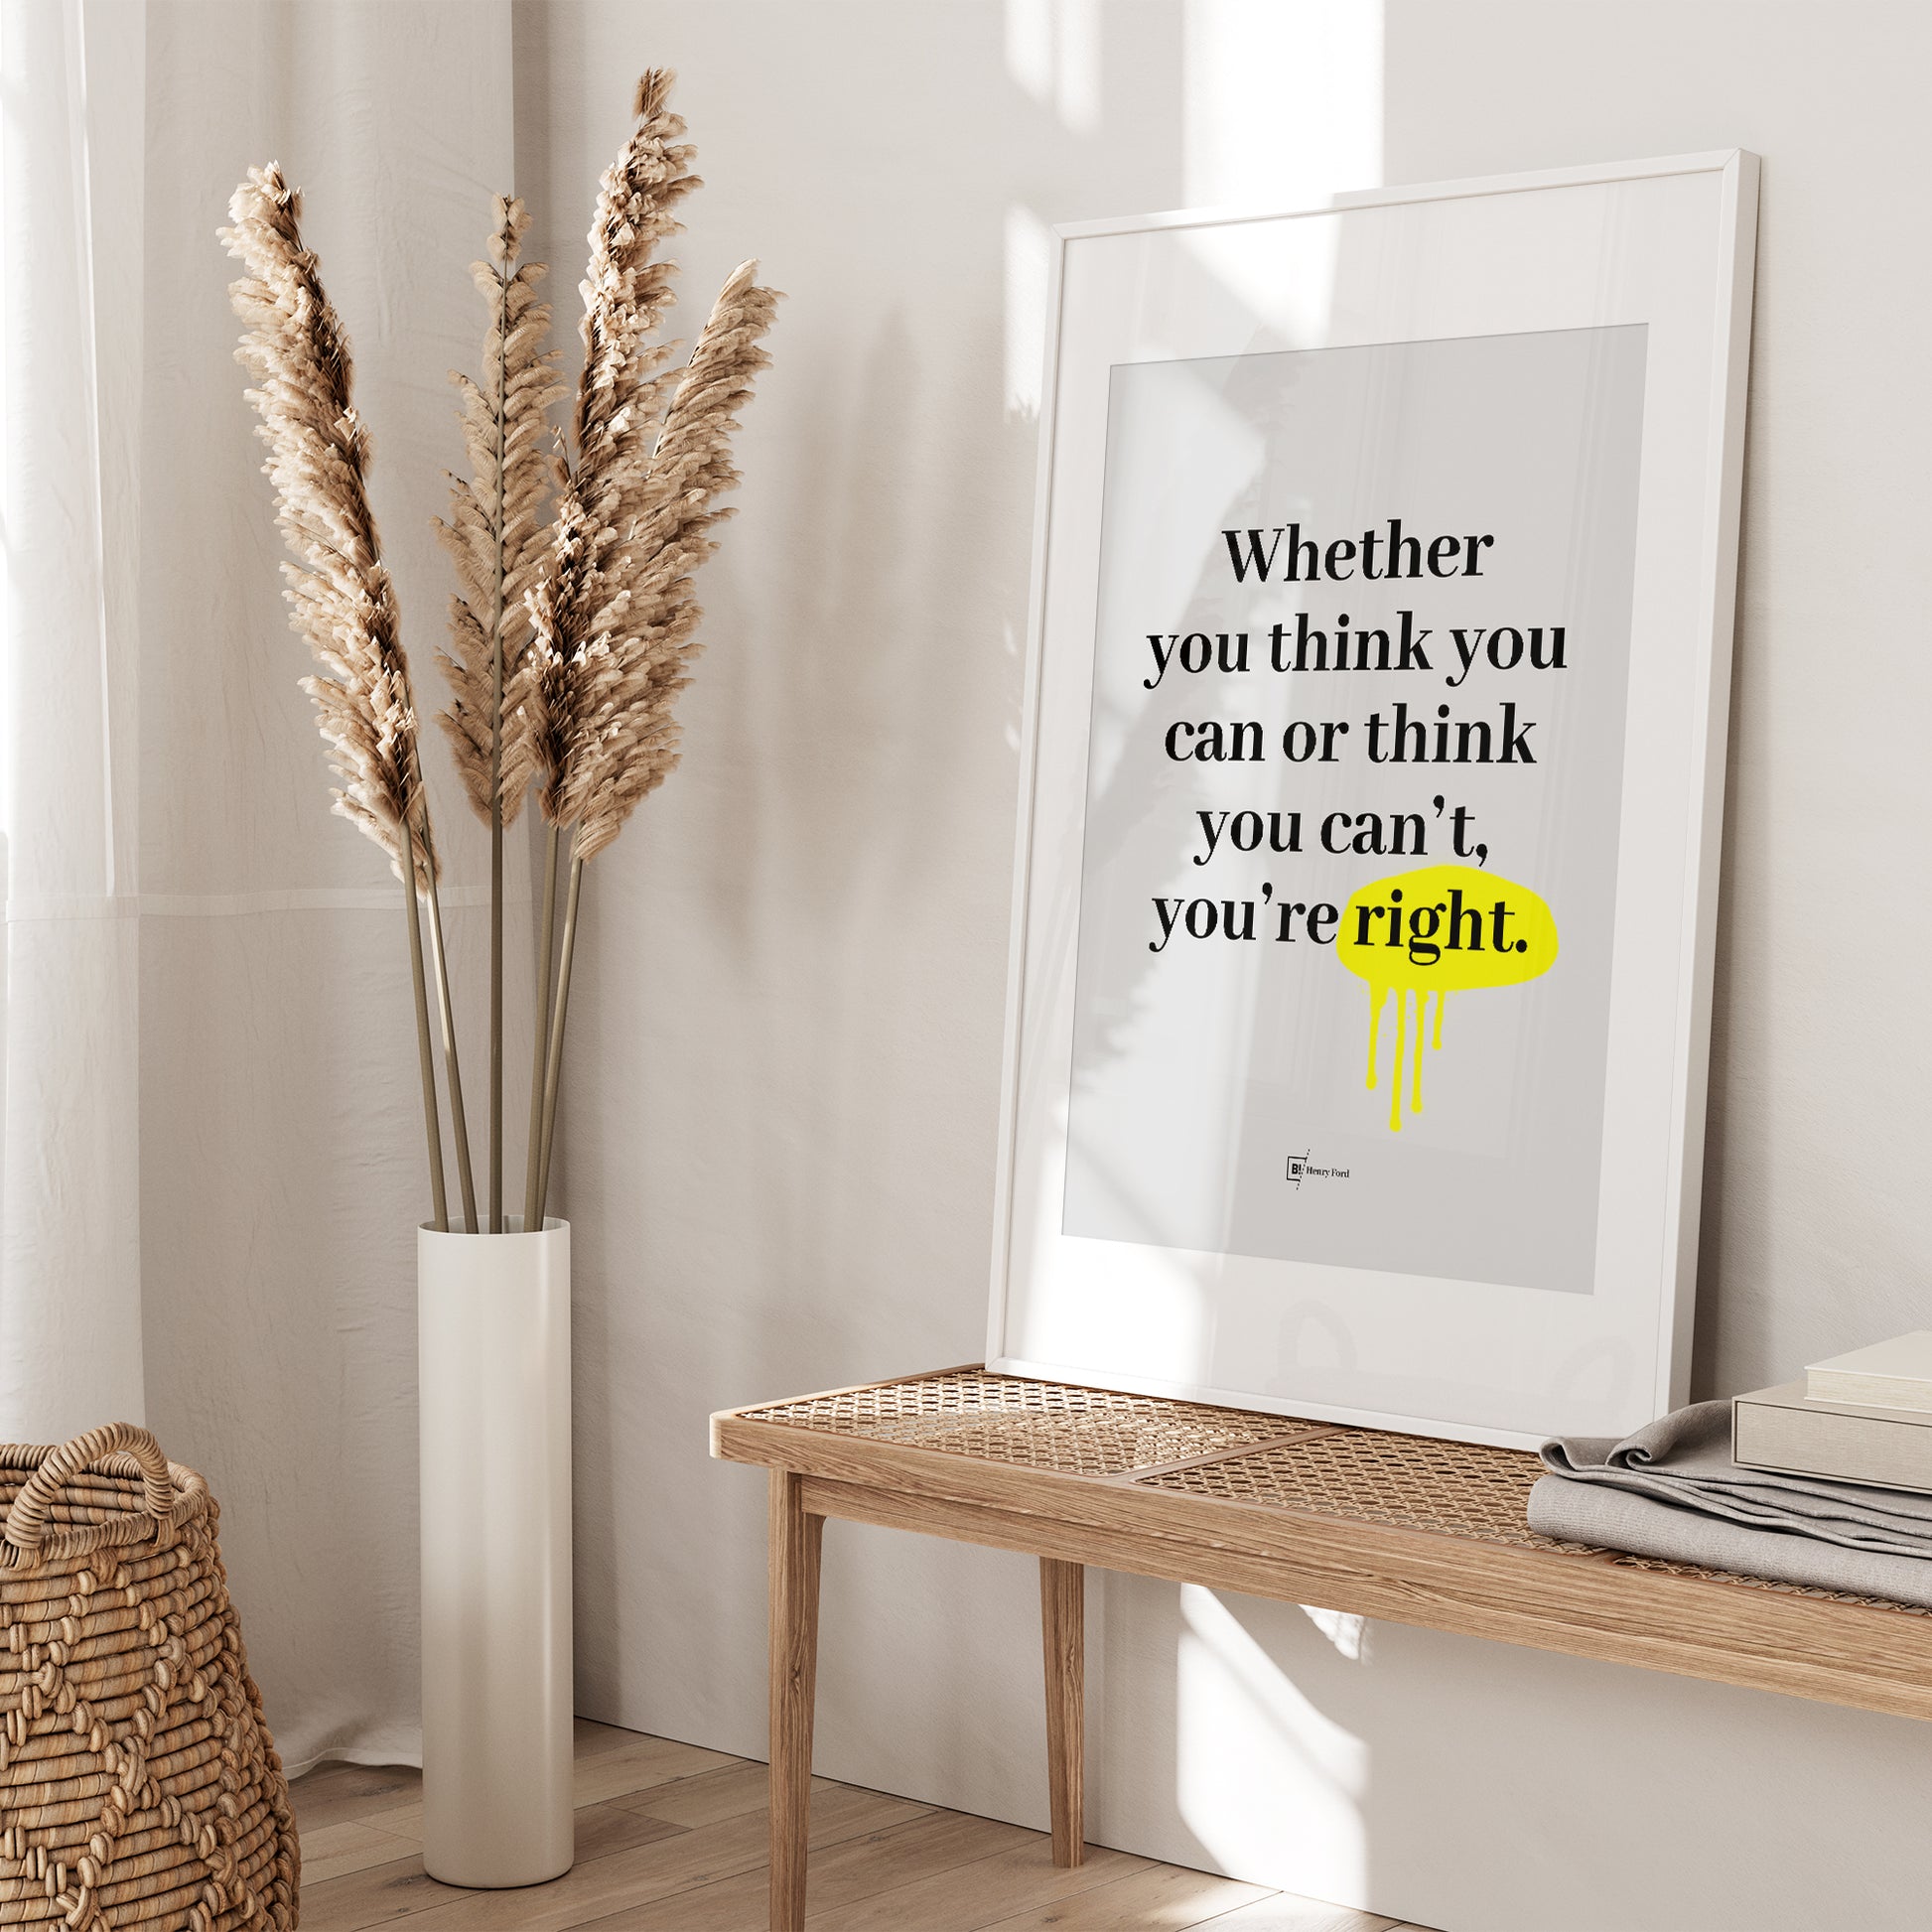 Be inspired by Henry Ford's famous "Whether you think you can or think you can't, you're right" quote art print. This artwork was printed using the giclée process on archival acid-free paper and is presented in a white frame with passe-partout that captures its timeless beauty in every detail.